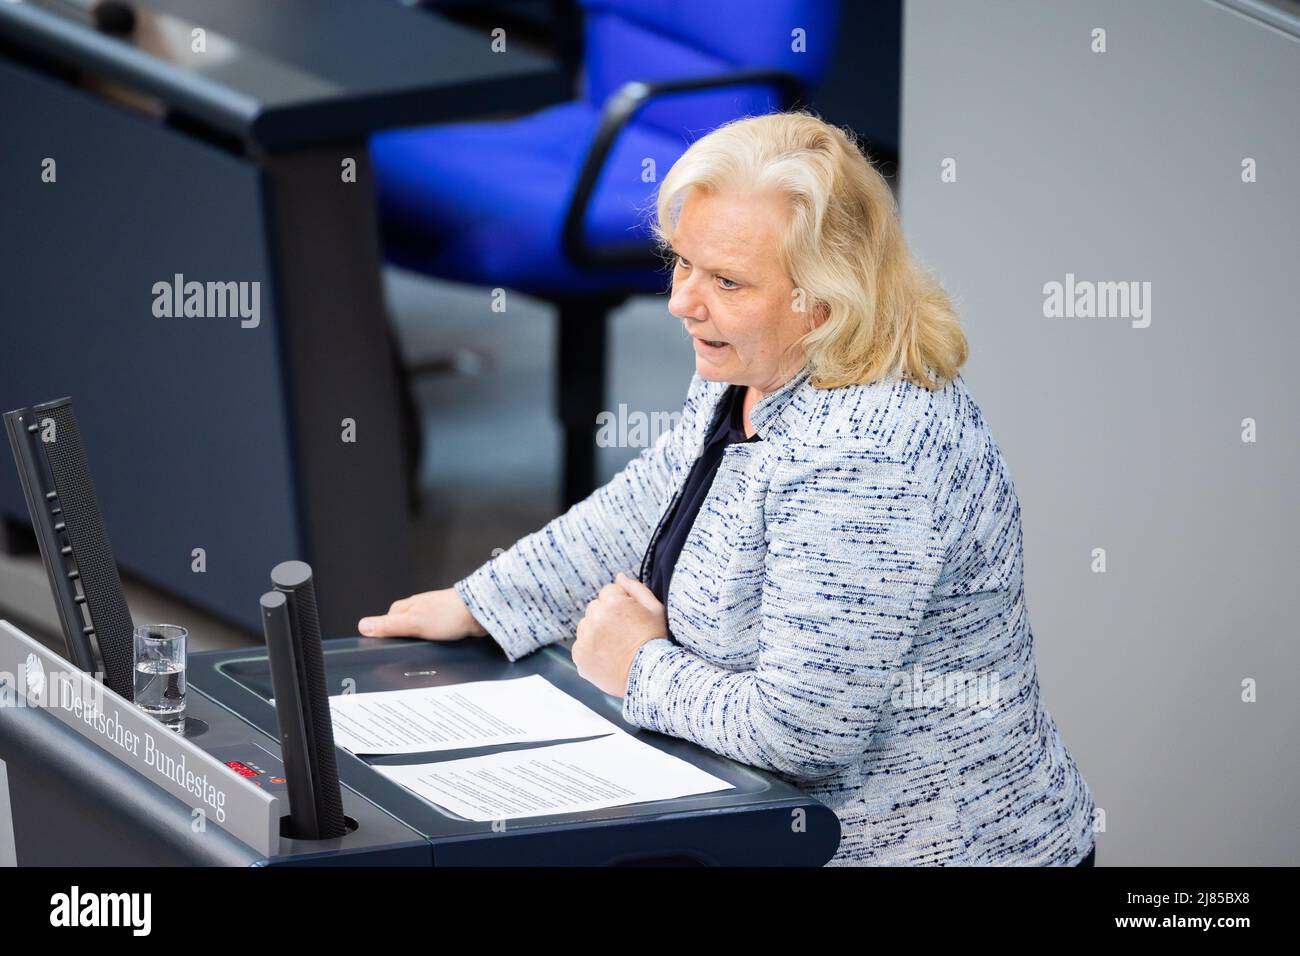 Berlin, Germany. 13th May, 2022. Ulrike Schielke-Ziesing (AfD), member of the German Bundestag, speaks in the plenary session of the German Bundestag. The agenda includes deliberations on the 2022 pension adjustment, the abolition of the ban on abortion advertising, the suspension of Hartz IV sanctions and the reduction of the energy tax on fuels. Credit: Christoph Soeder/dpa/Alamy Live News Stock Photo